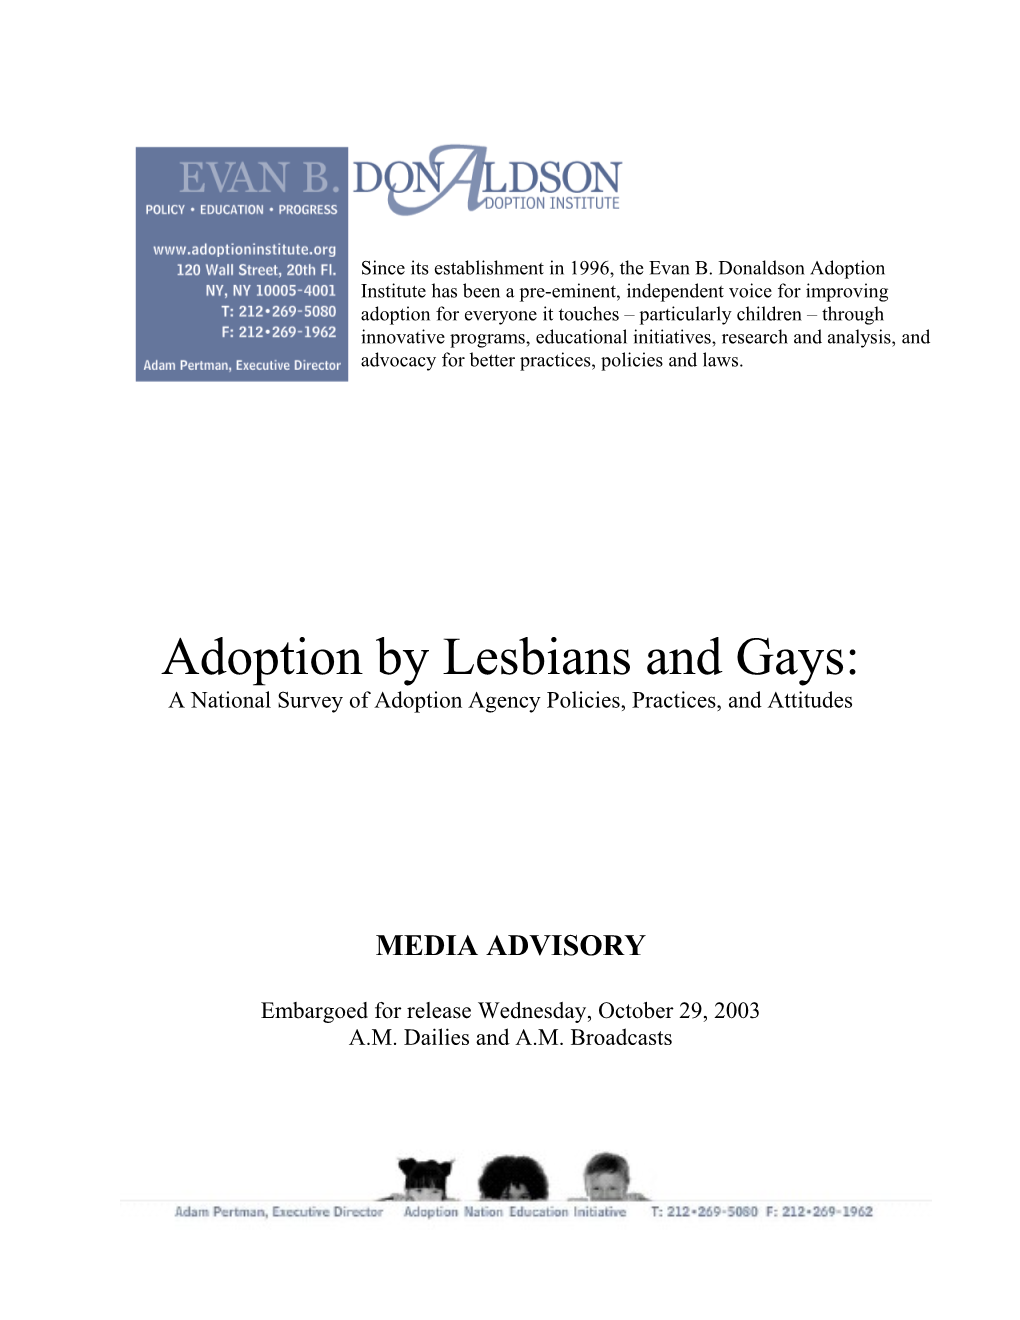 Adoption by Lesbians and Gays